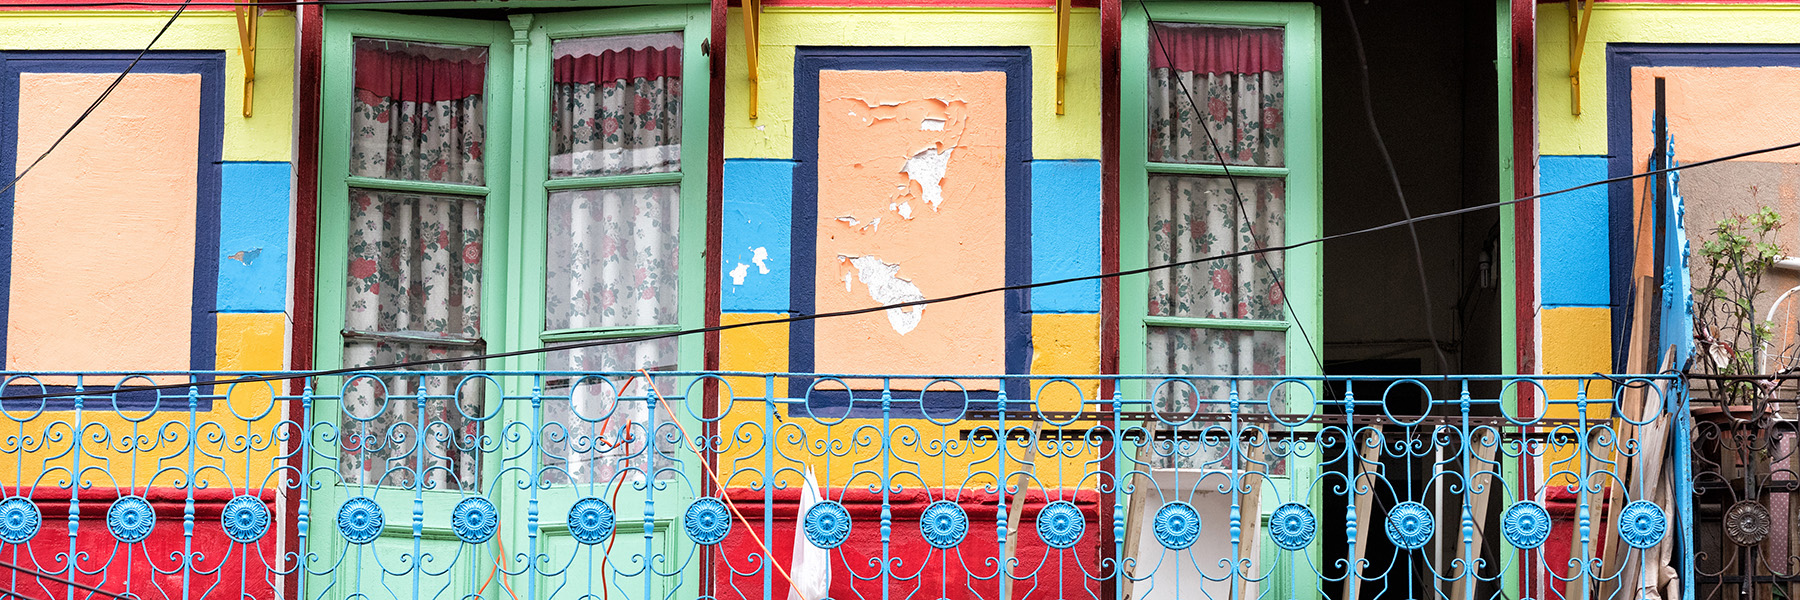 Colorful building front with decorative windows and doors 